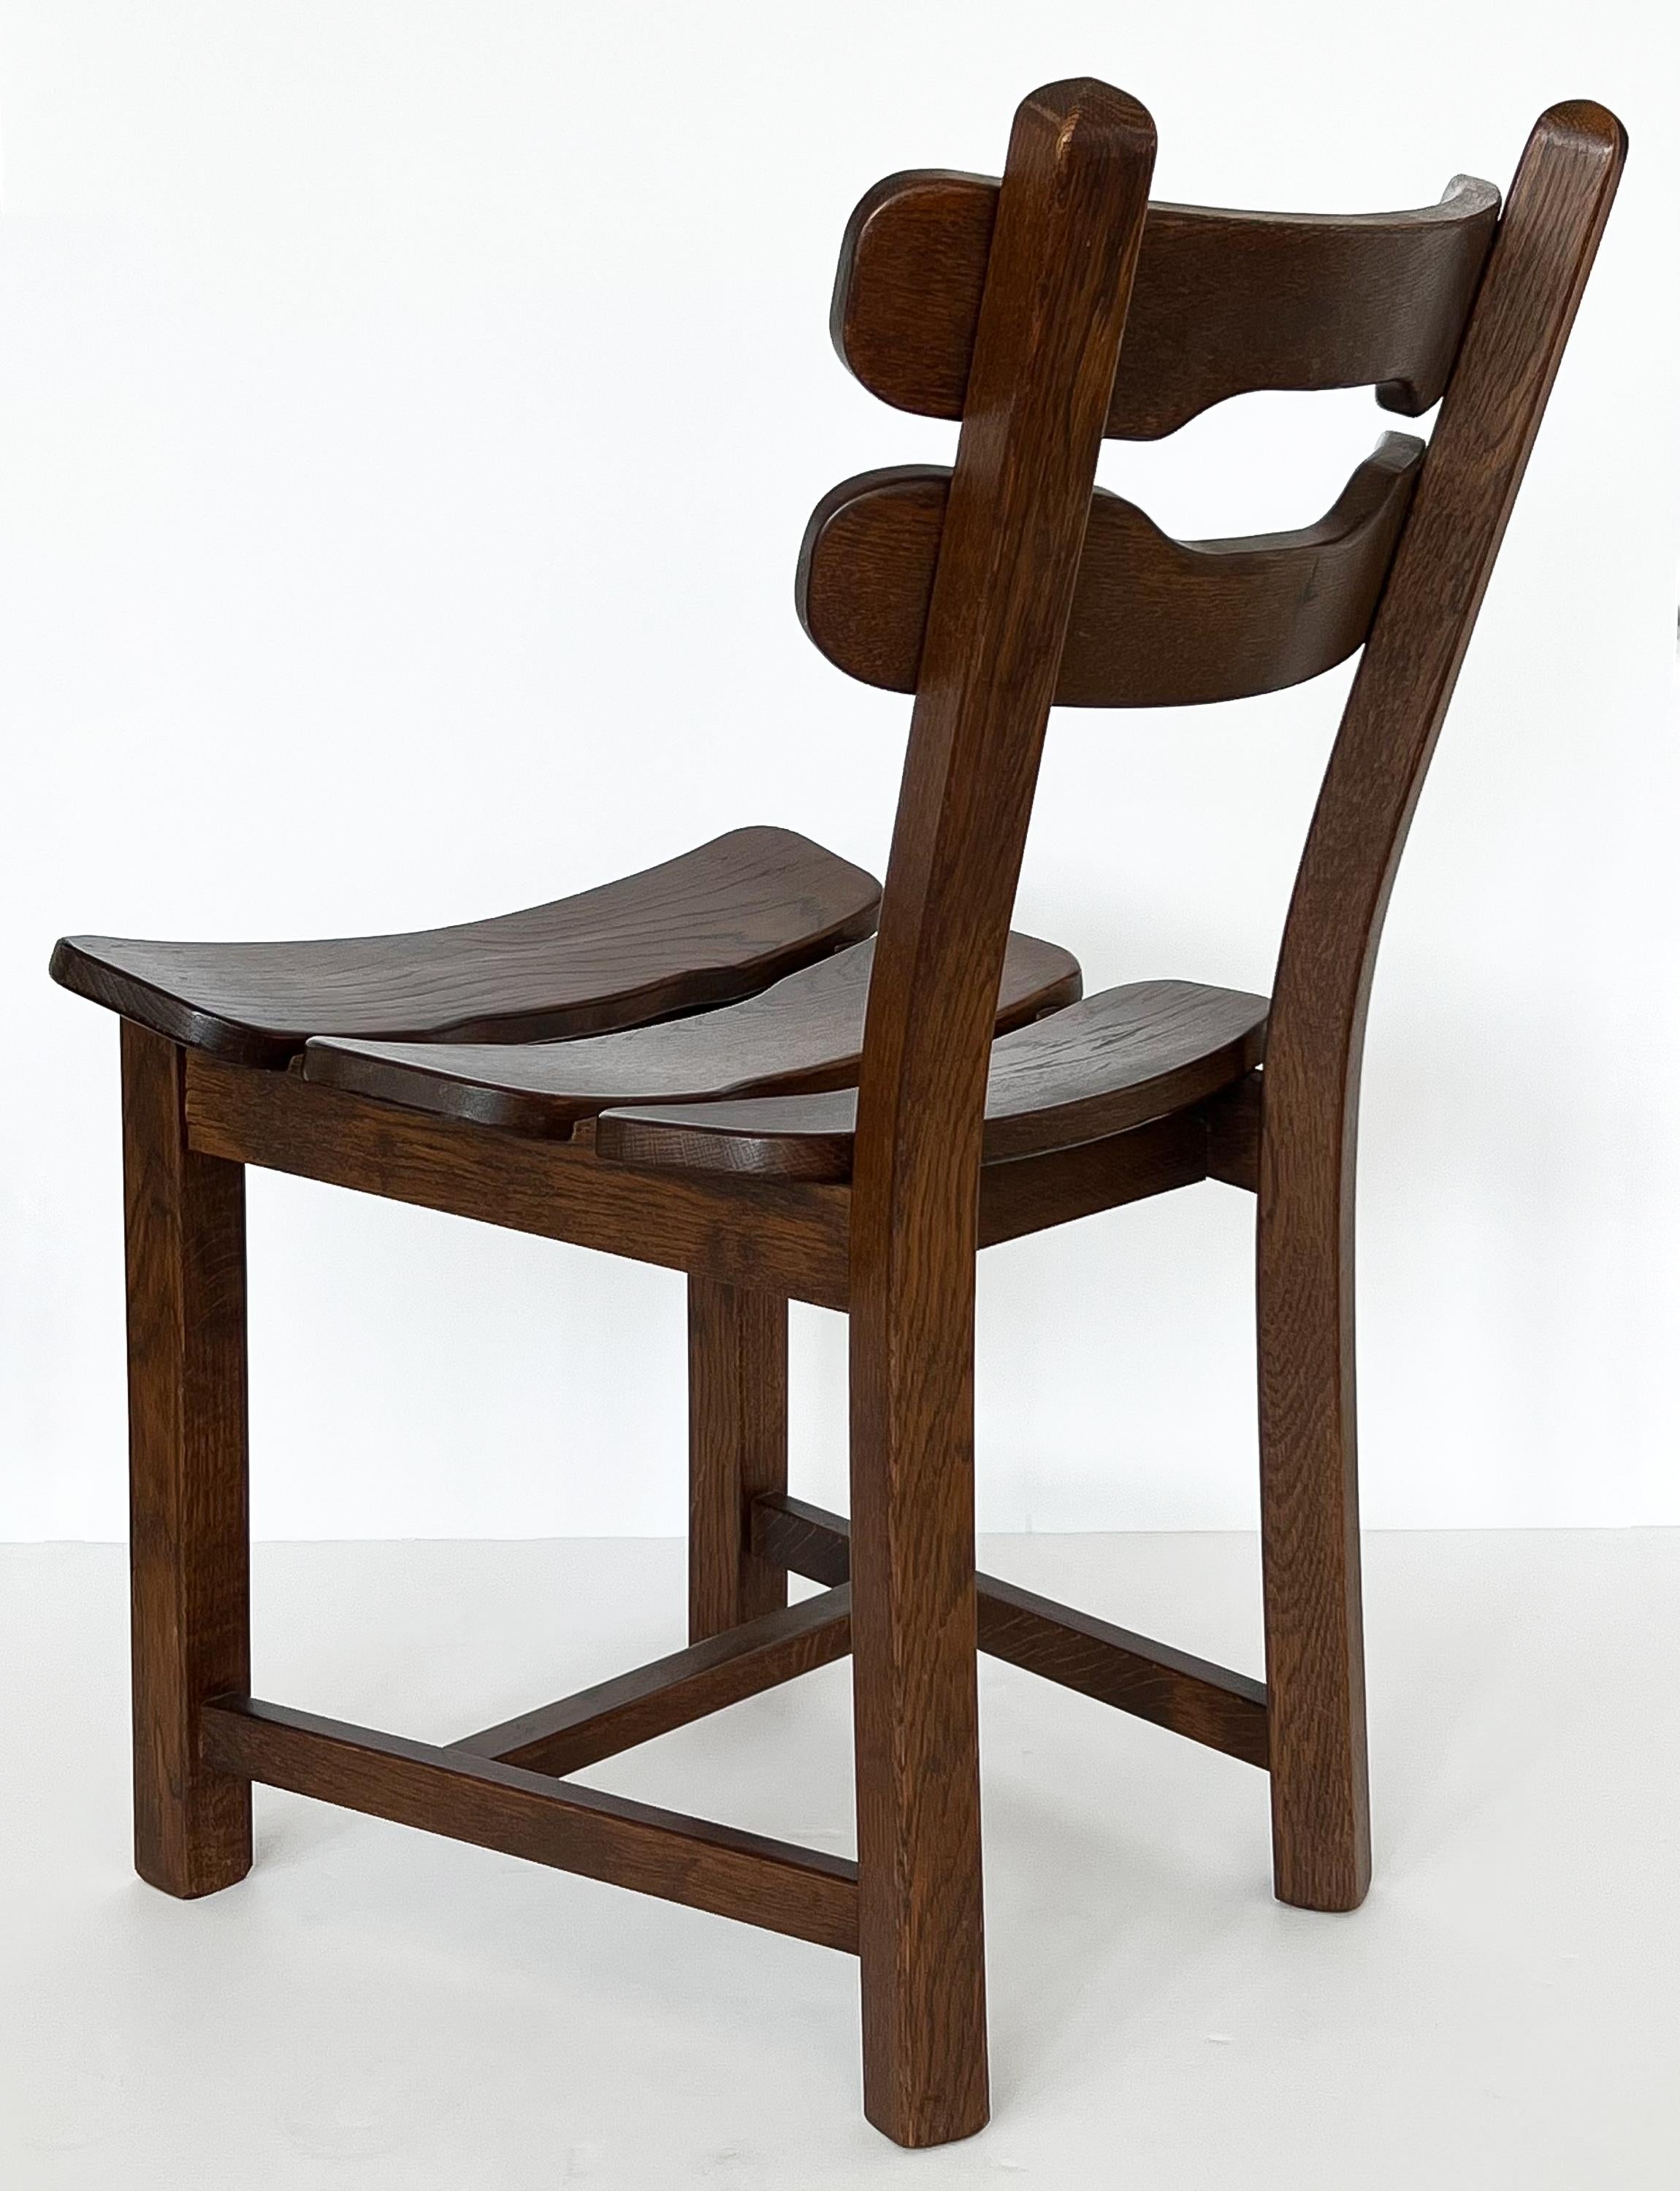 Mid-20th Century Set 4 Brutalist Oak Dining Chairs by Dittmann & Co for Awa Radbound